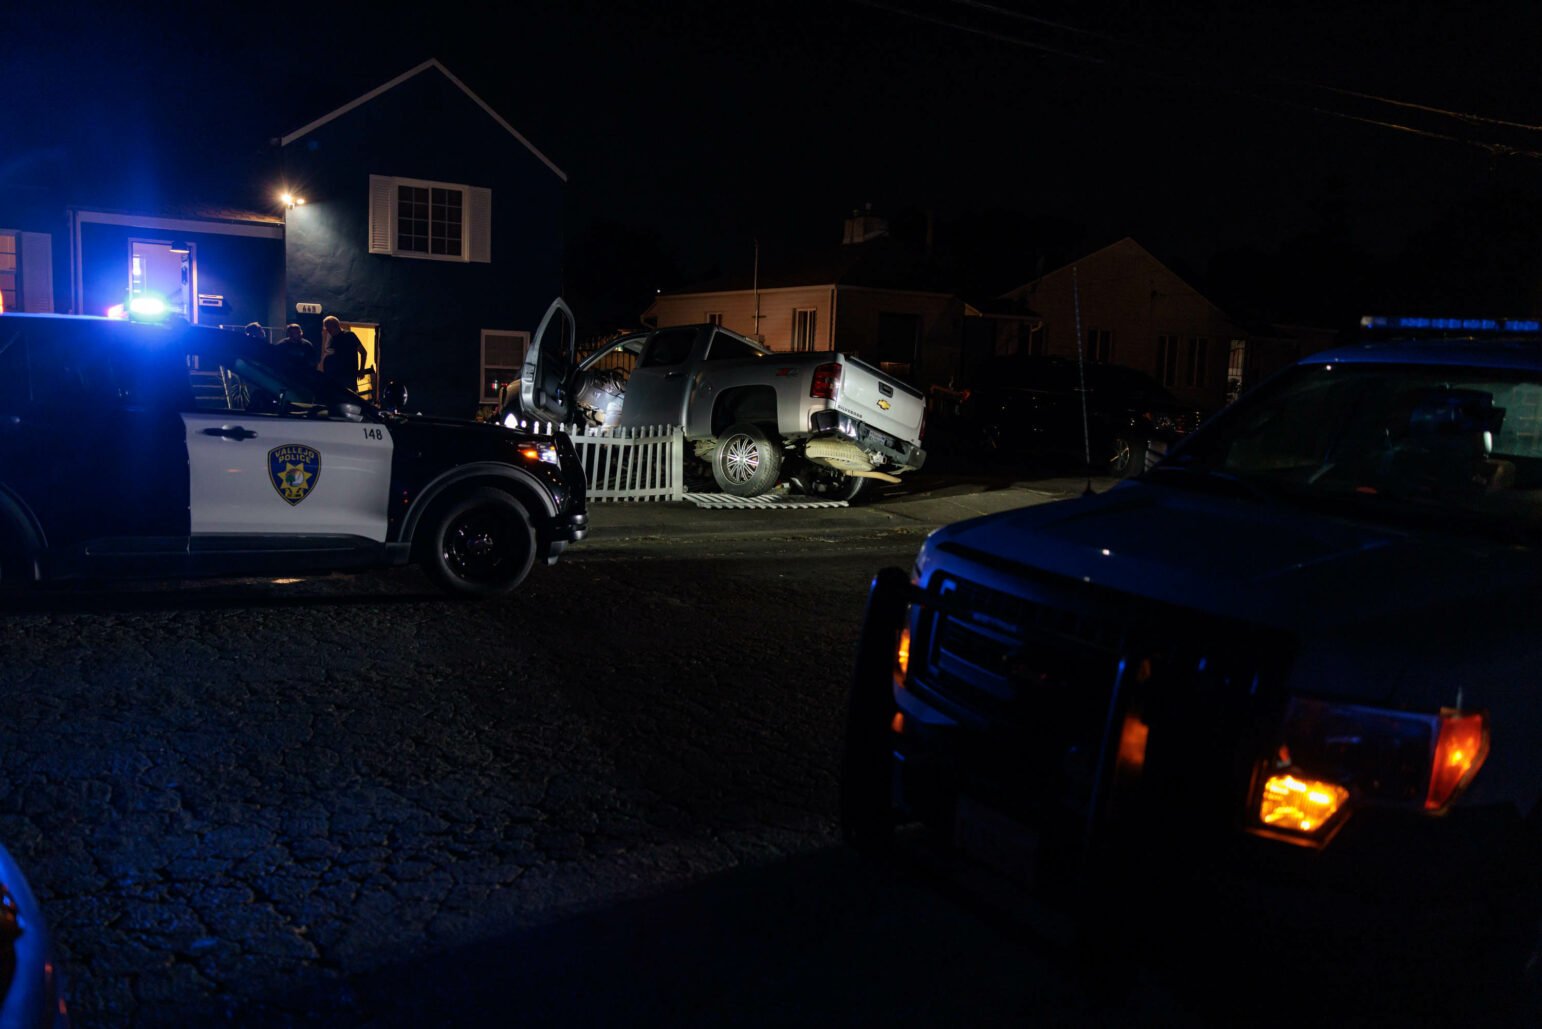 Nighttime scene showing a silver pickup truck that has crashed into a white picket fence in front of a dark blue house. Two police cars with flashing lights are parked nearby, and several officers are standing around the scene.